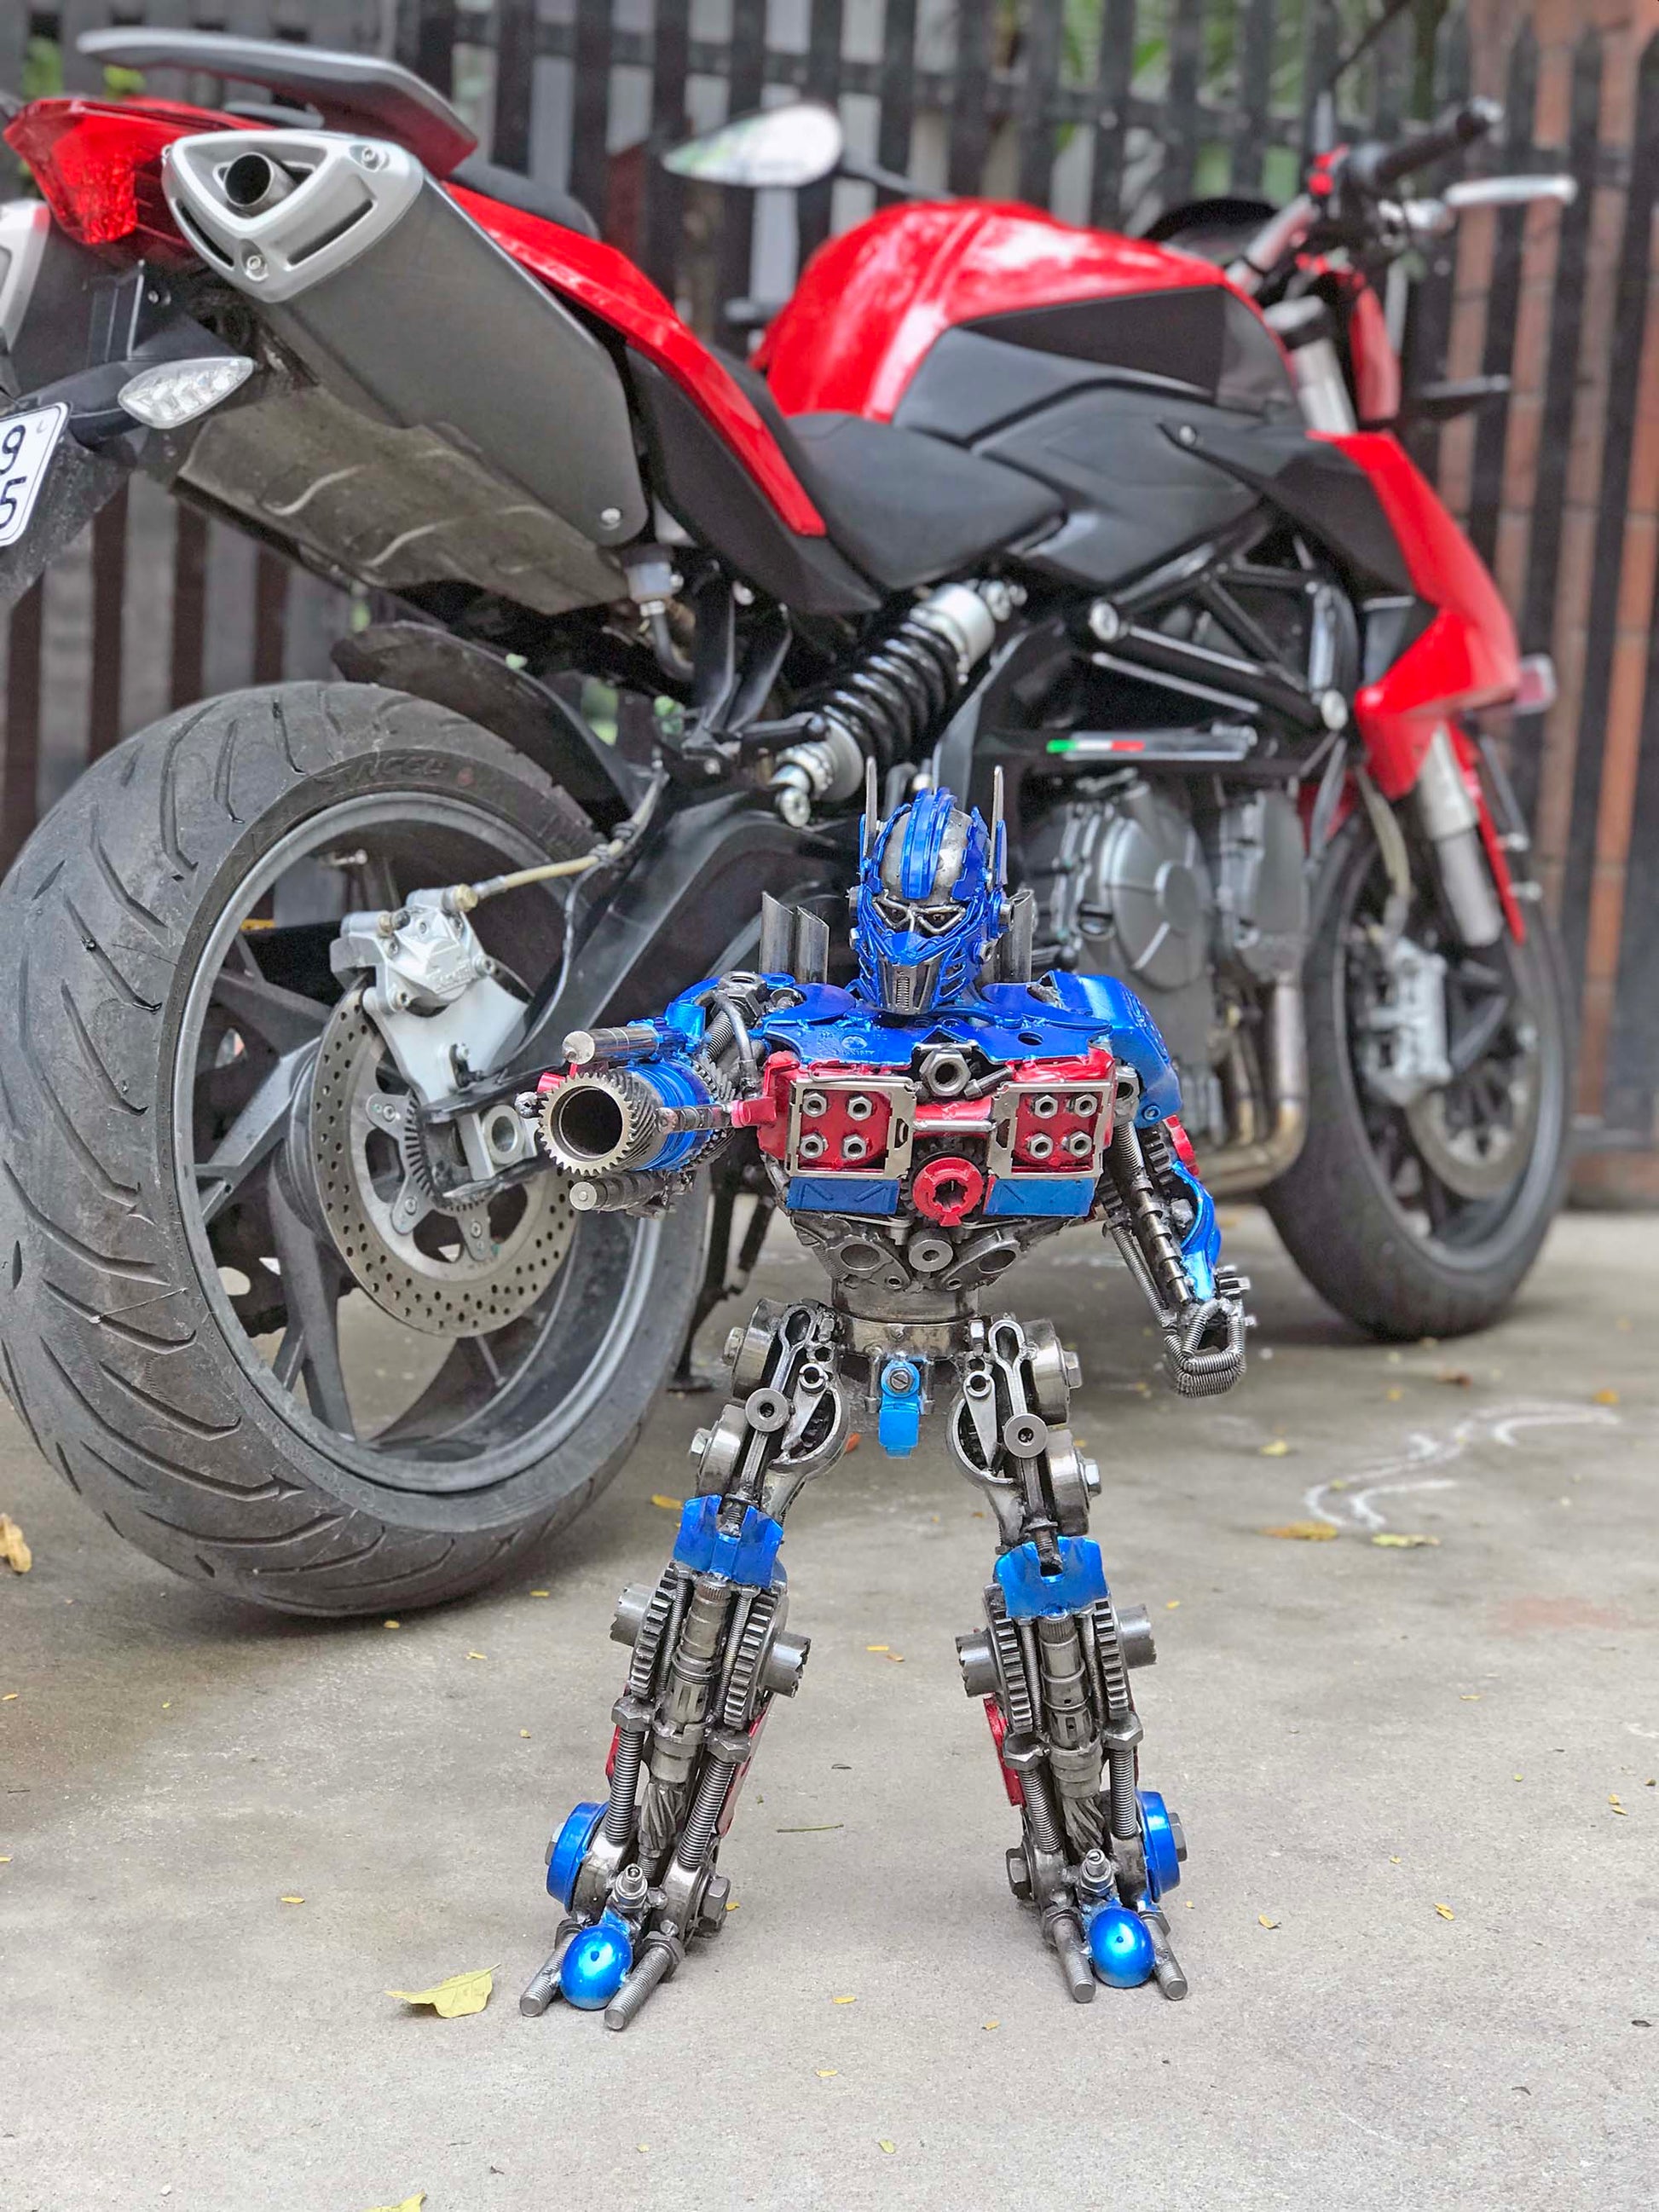 Transformers Optimus Prime hand-crafted from metal